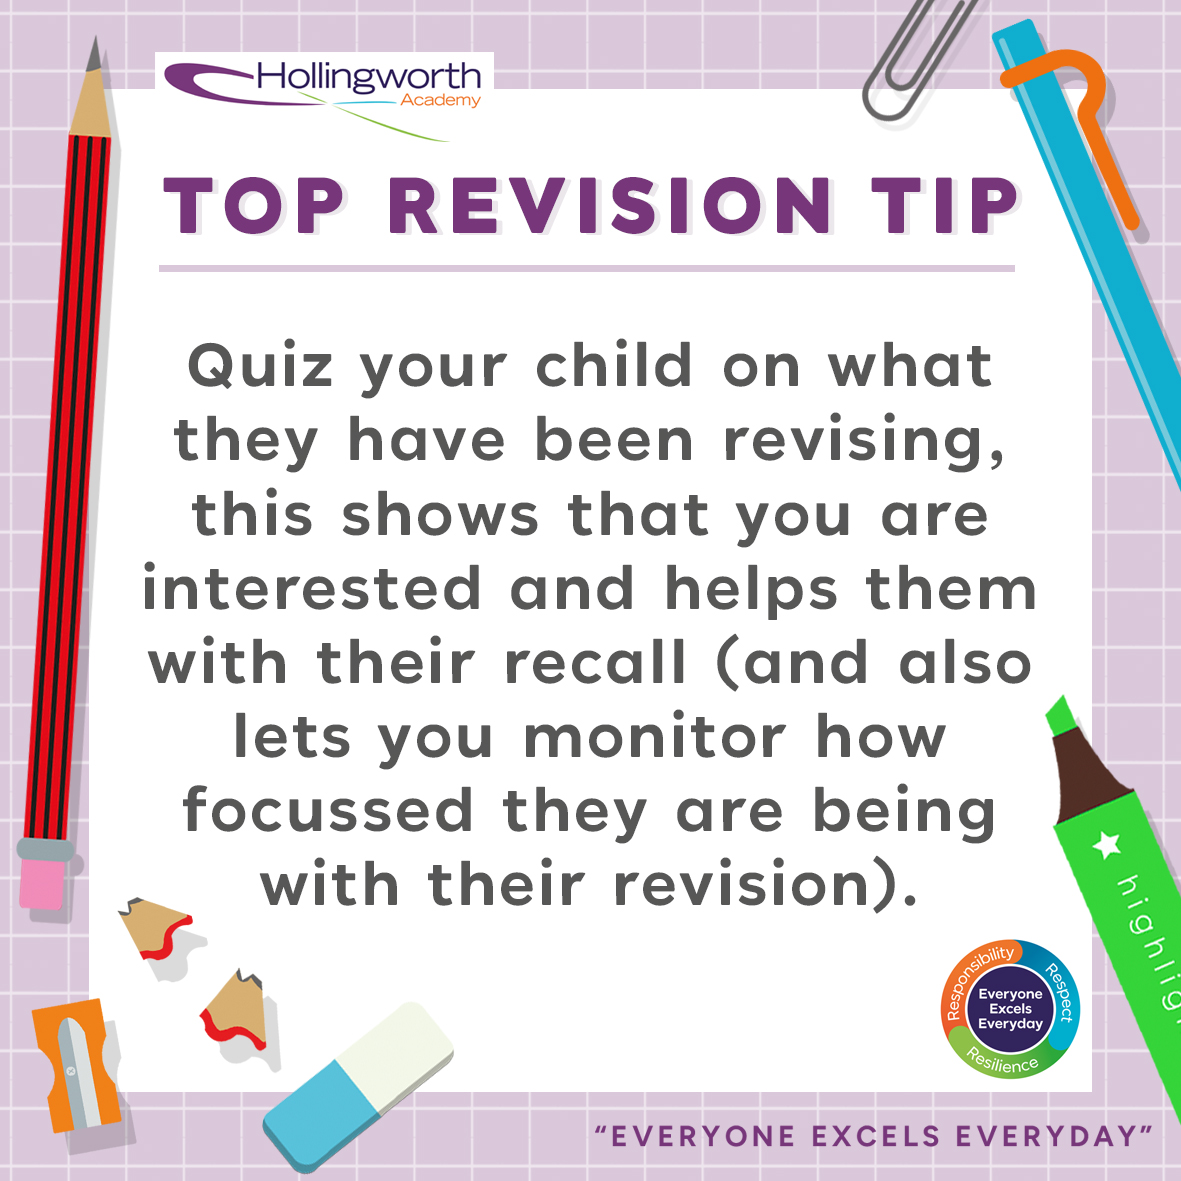 This week’s top revision tip for Year 11 parents and carers! @WCSQM #raisingrochdale #worldclass #everyoneexcelseveryday